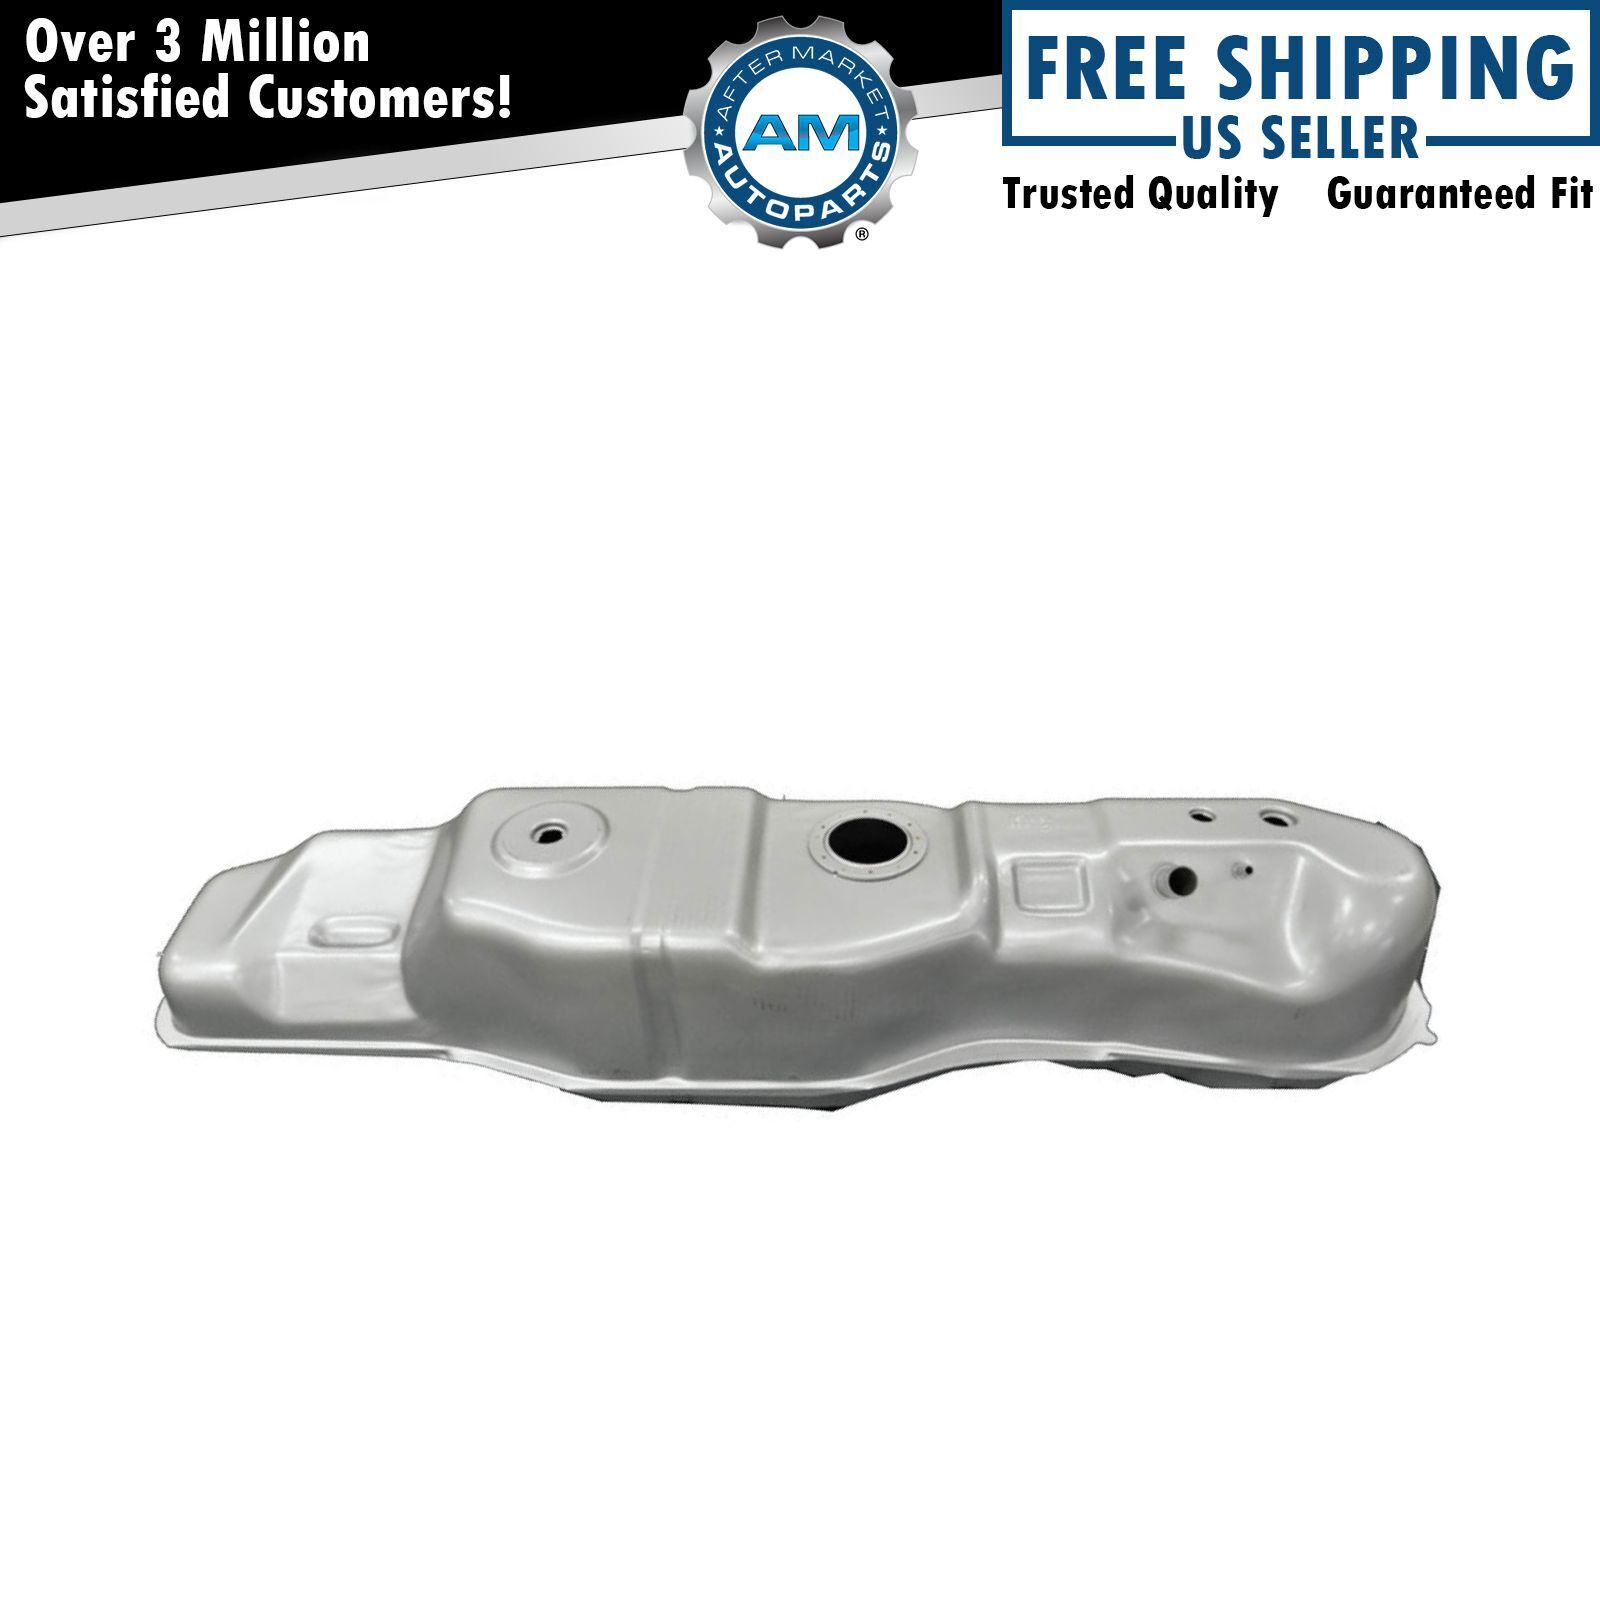 30 Gallon Gas Fuel Tank for Ford F Series Pickup Truck